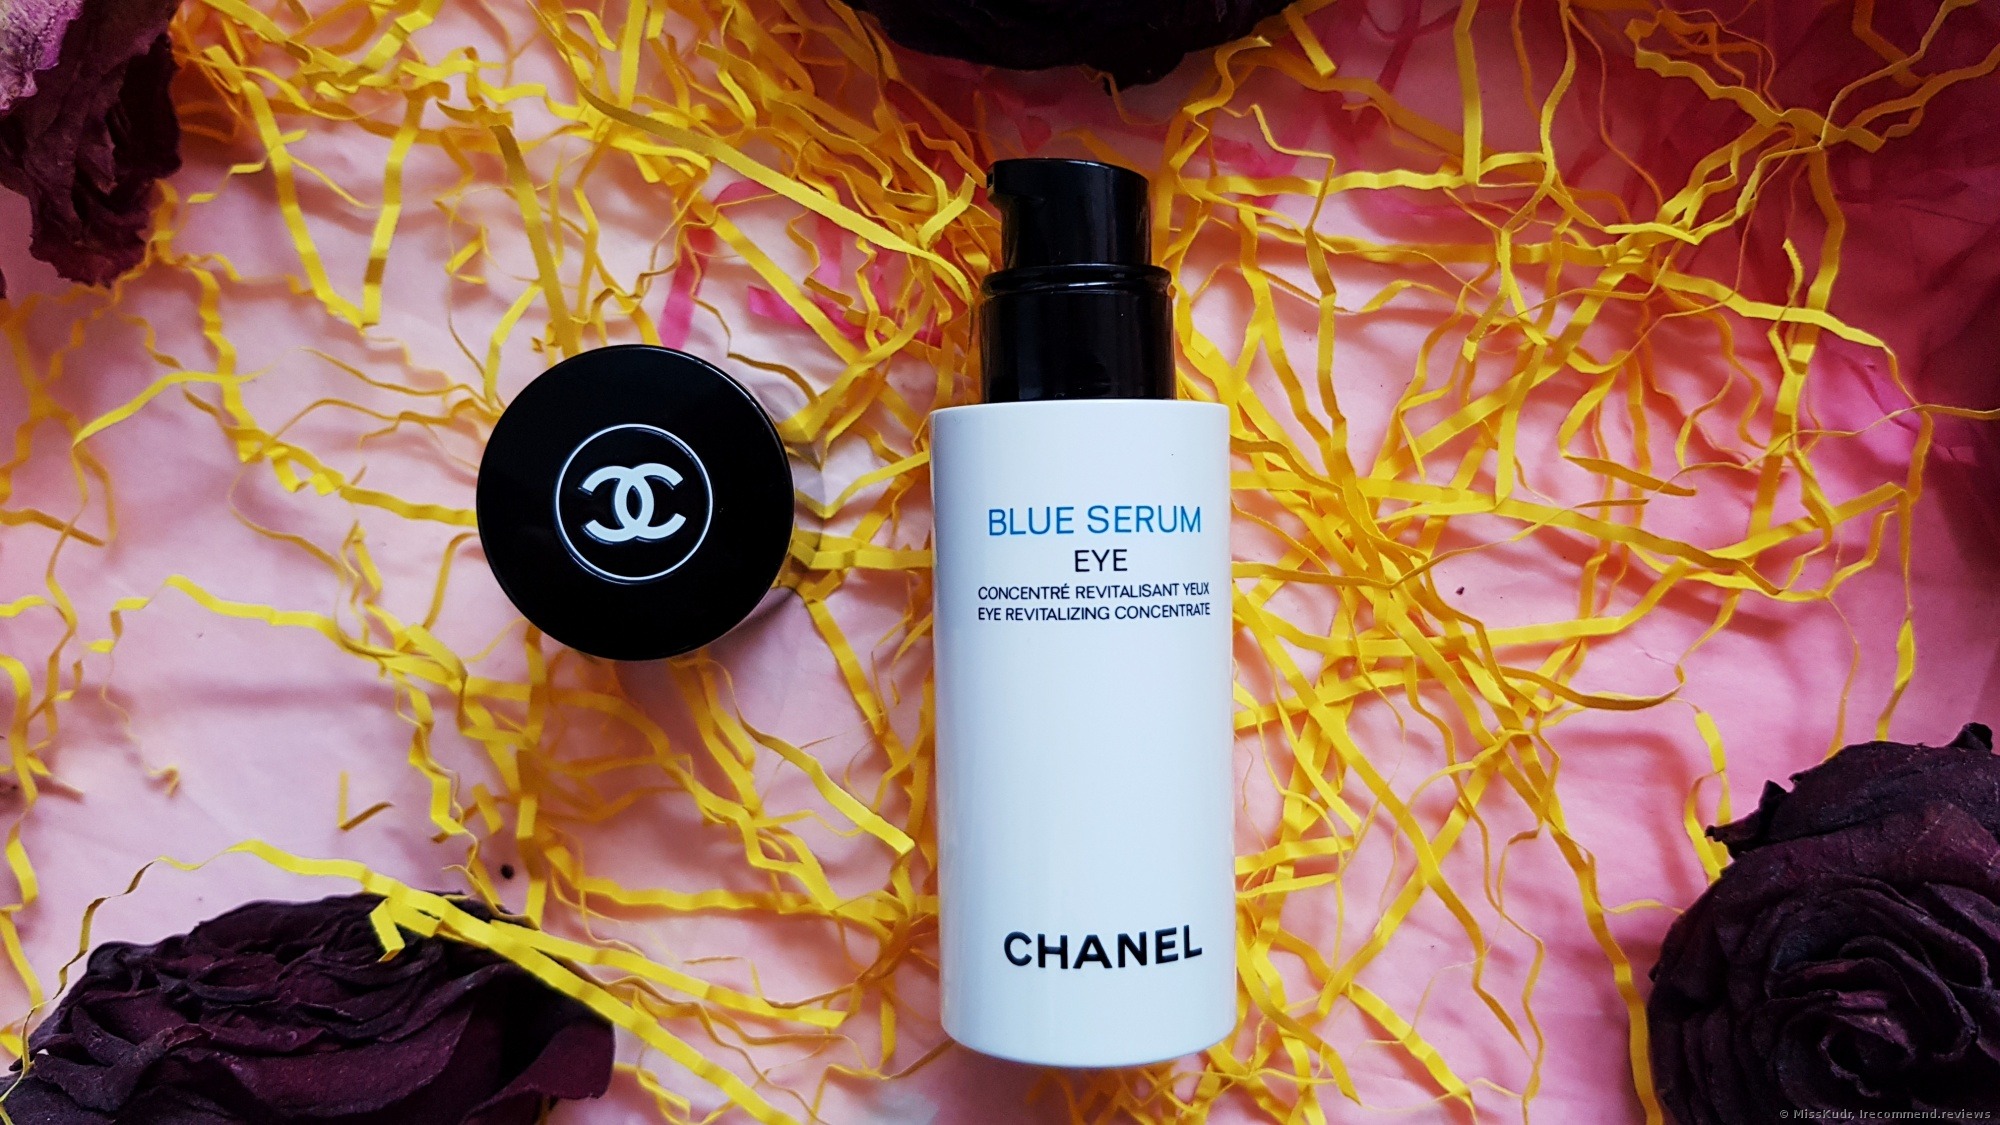 Chanel Blue Eye Serum  Blue revitalizing serum from Chanel and how to use  it  Consumer reviews